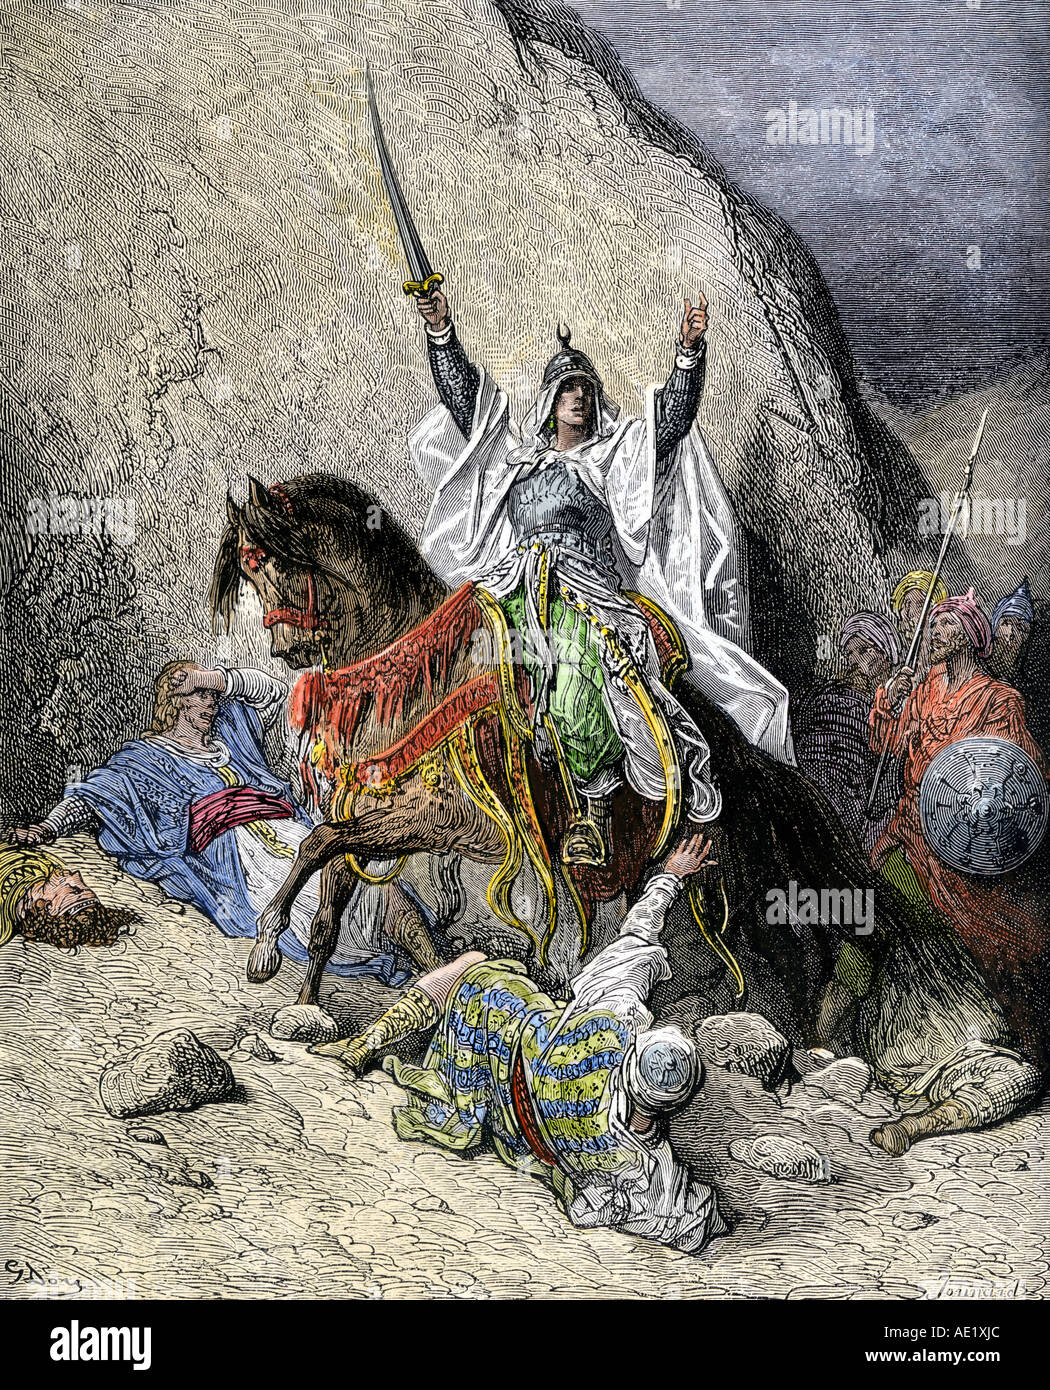 Saladin commander of Muslim forces against Christians in the Third Crusade 1100s. Hand-colored woodcut of a Gustave Dore illustration Stock Photo